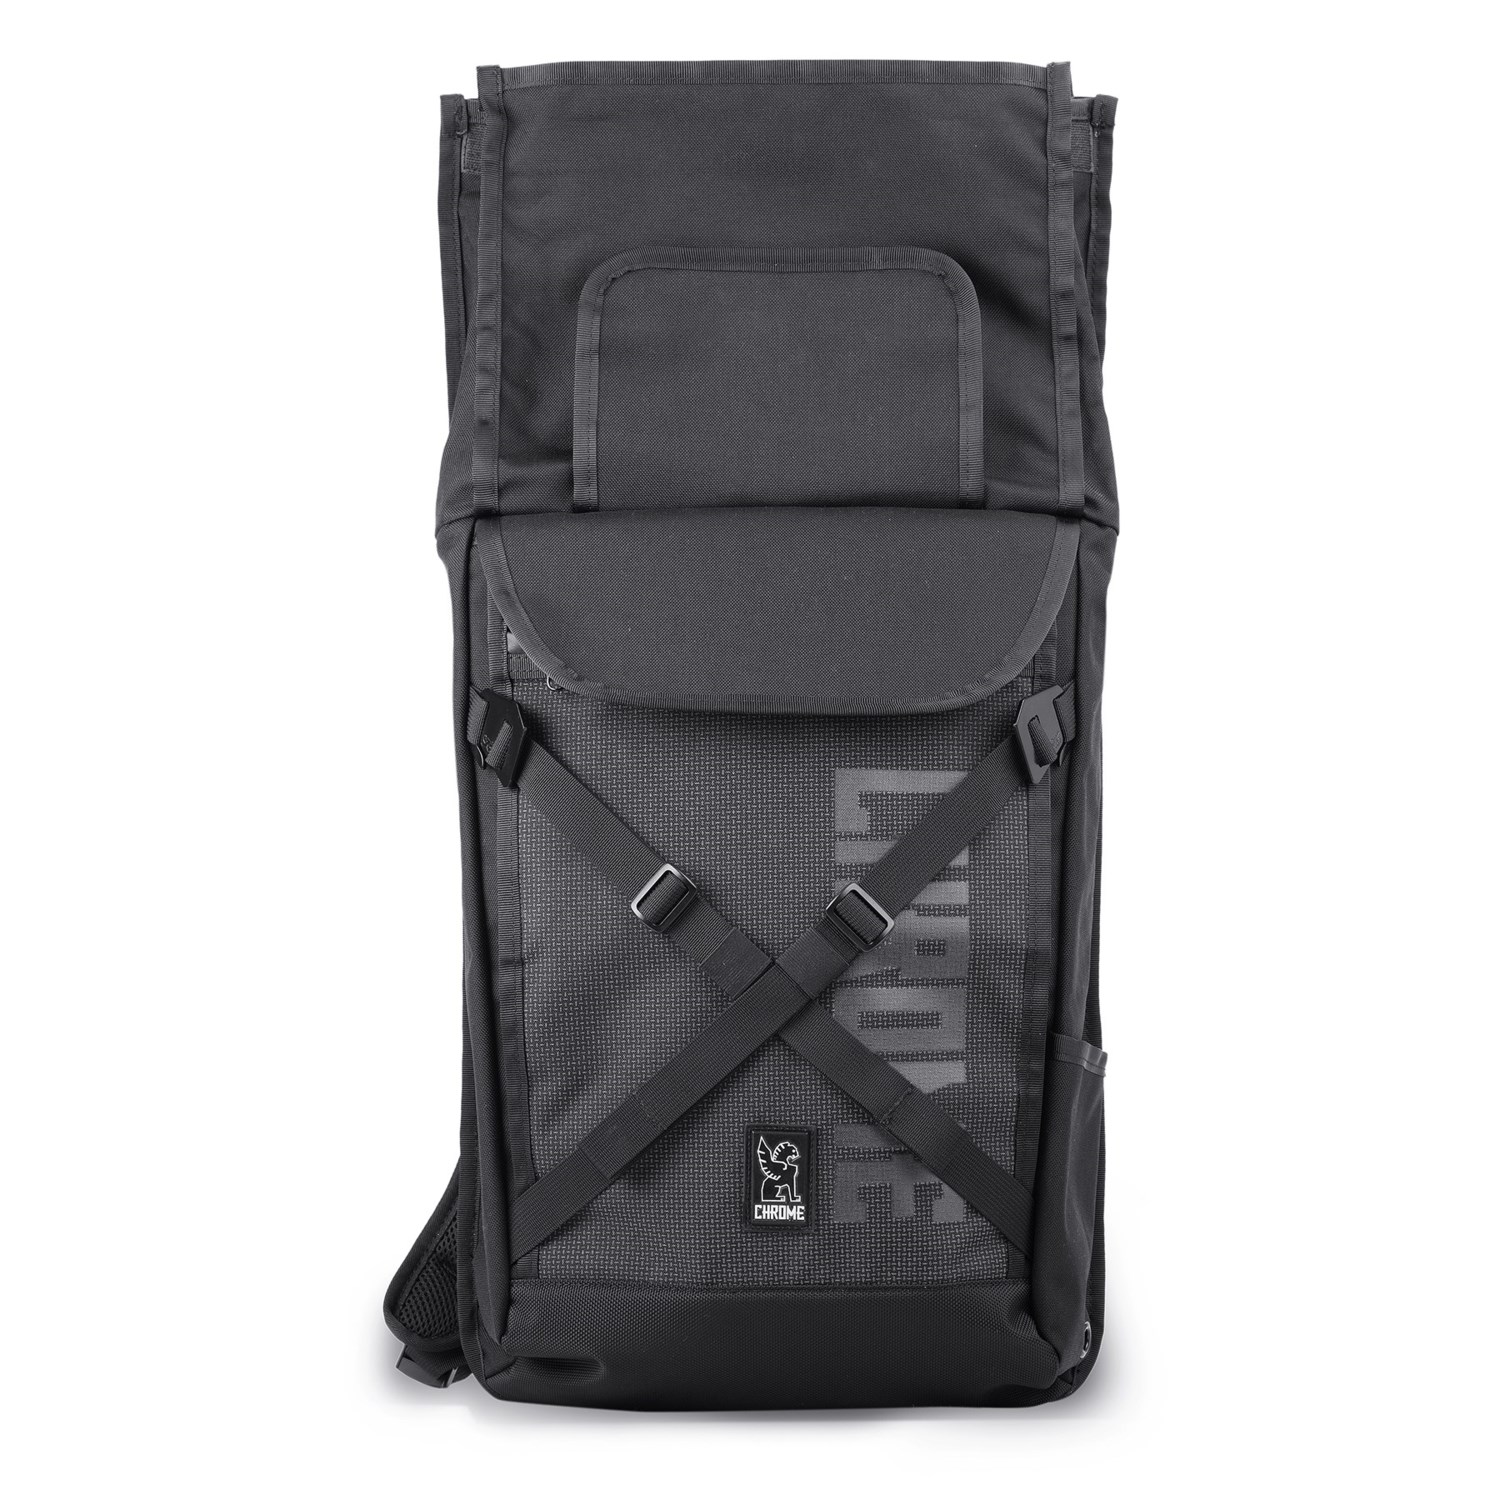 Chrome Industries Bravo Reflective Roll-Top Backpack 9817G - Save 44%